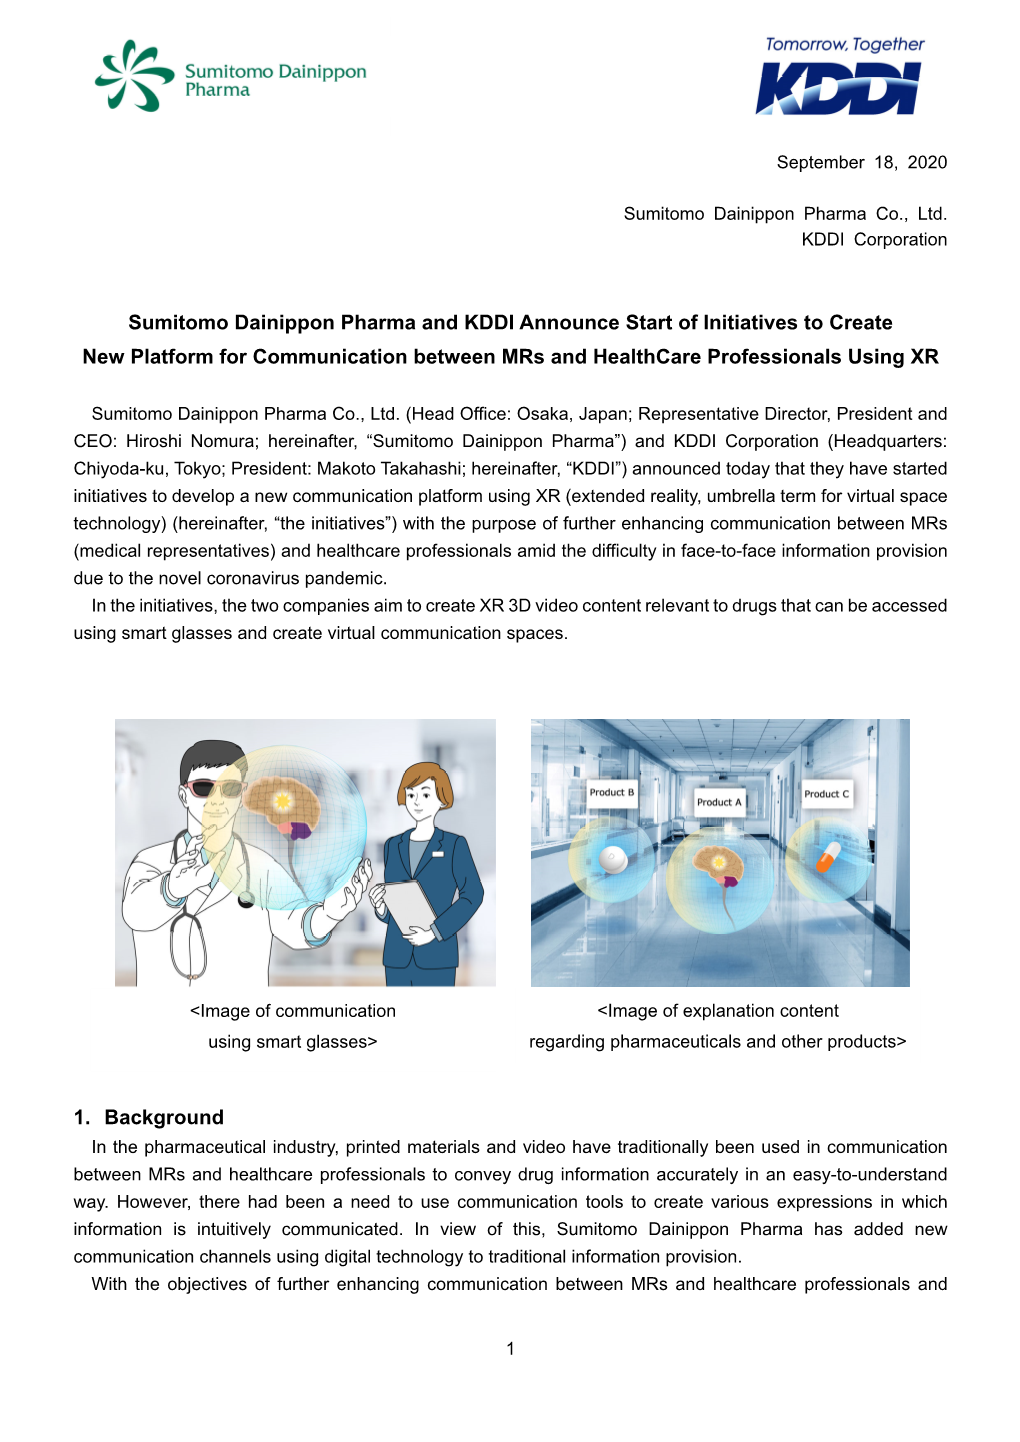 Sumitomo Dainippon Pharma and KDDI Announce Start of Initiatives to Create New Platform for Communication Between Mrs and Healthcare Professionals Using XR